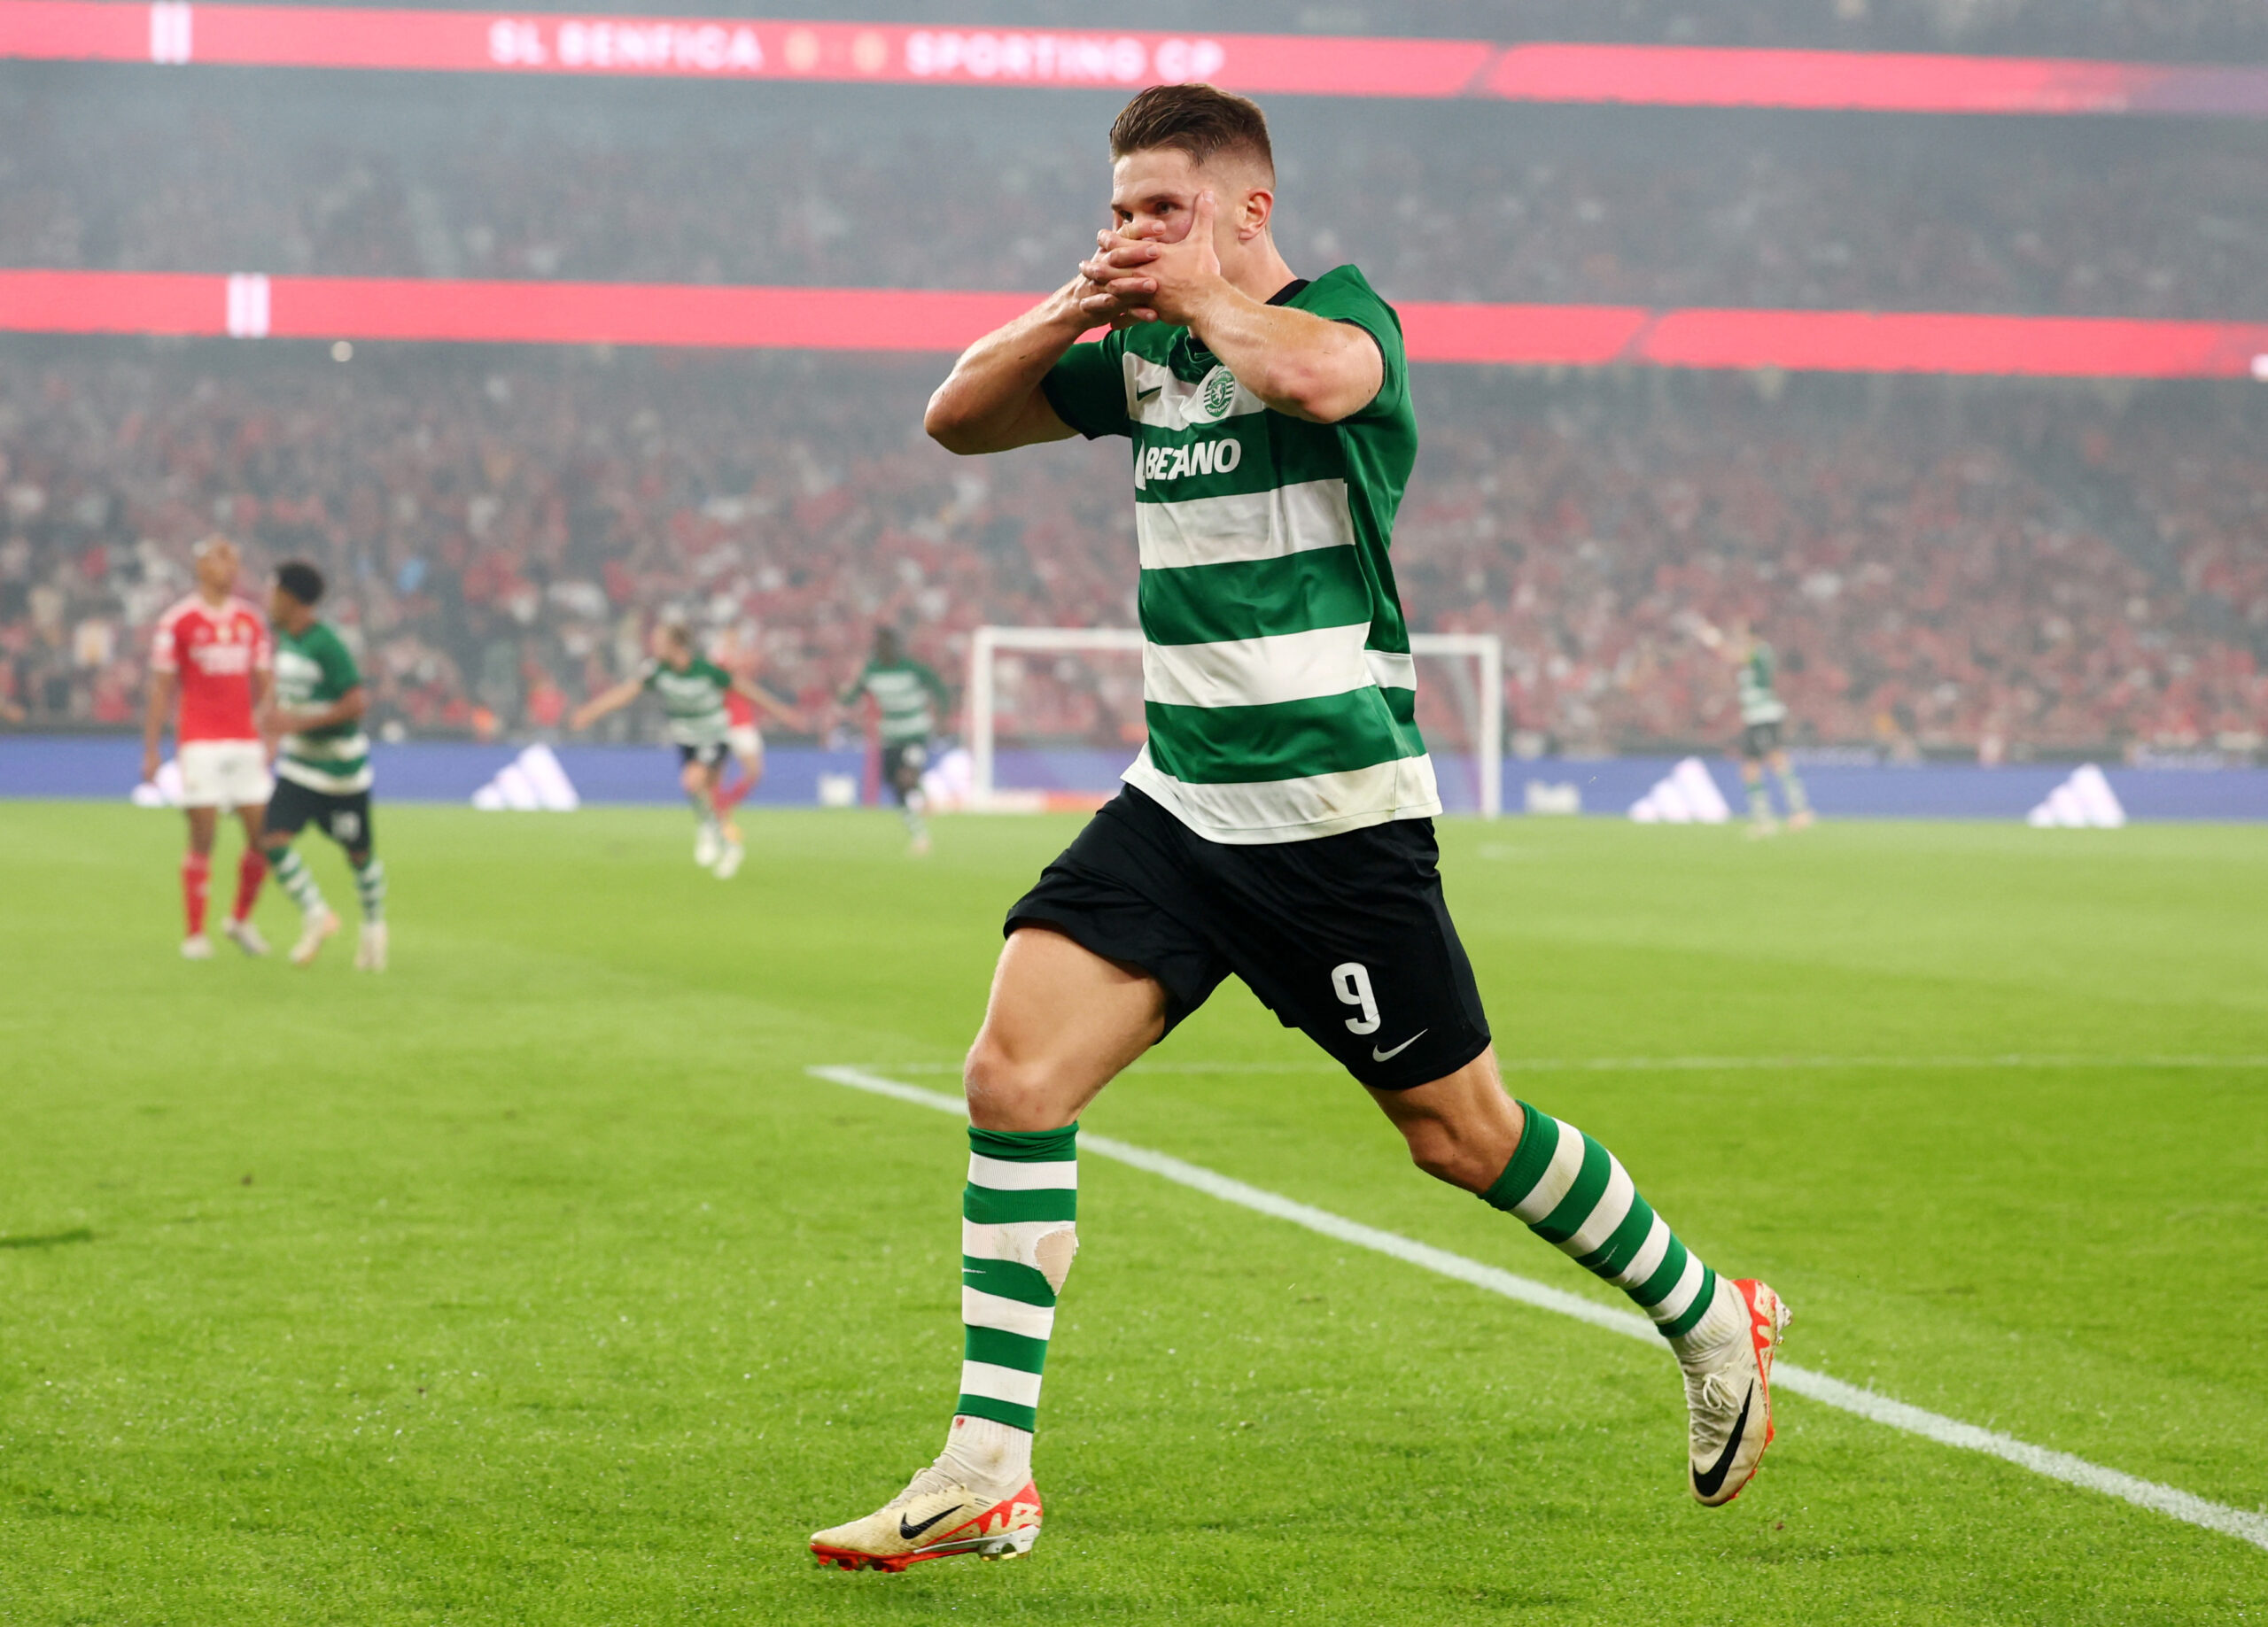 Milan will be an interested spectator of the clash between Sporting CP and Atalanta to keep tabs on Viktor Gyokeres ahead of the summer.